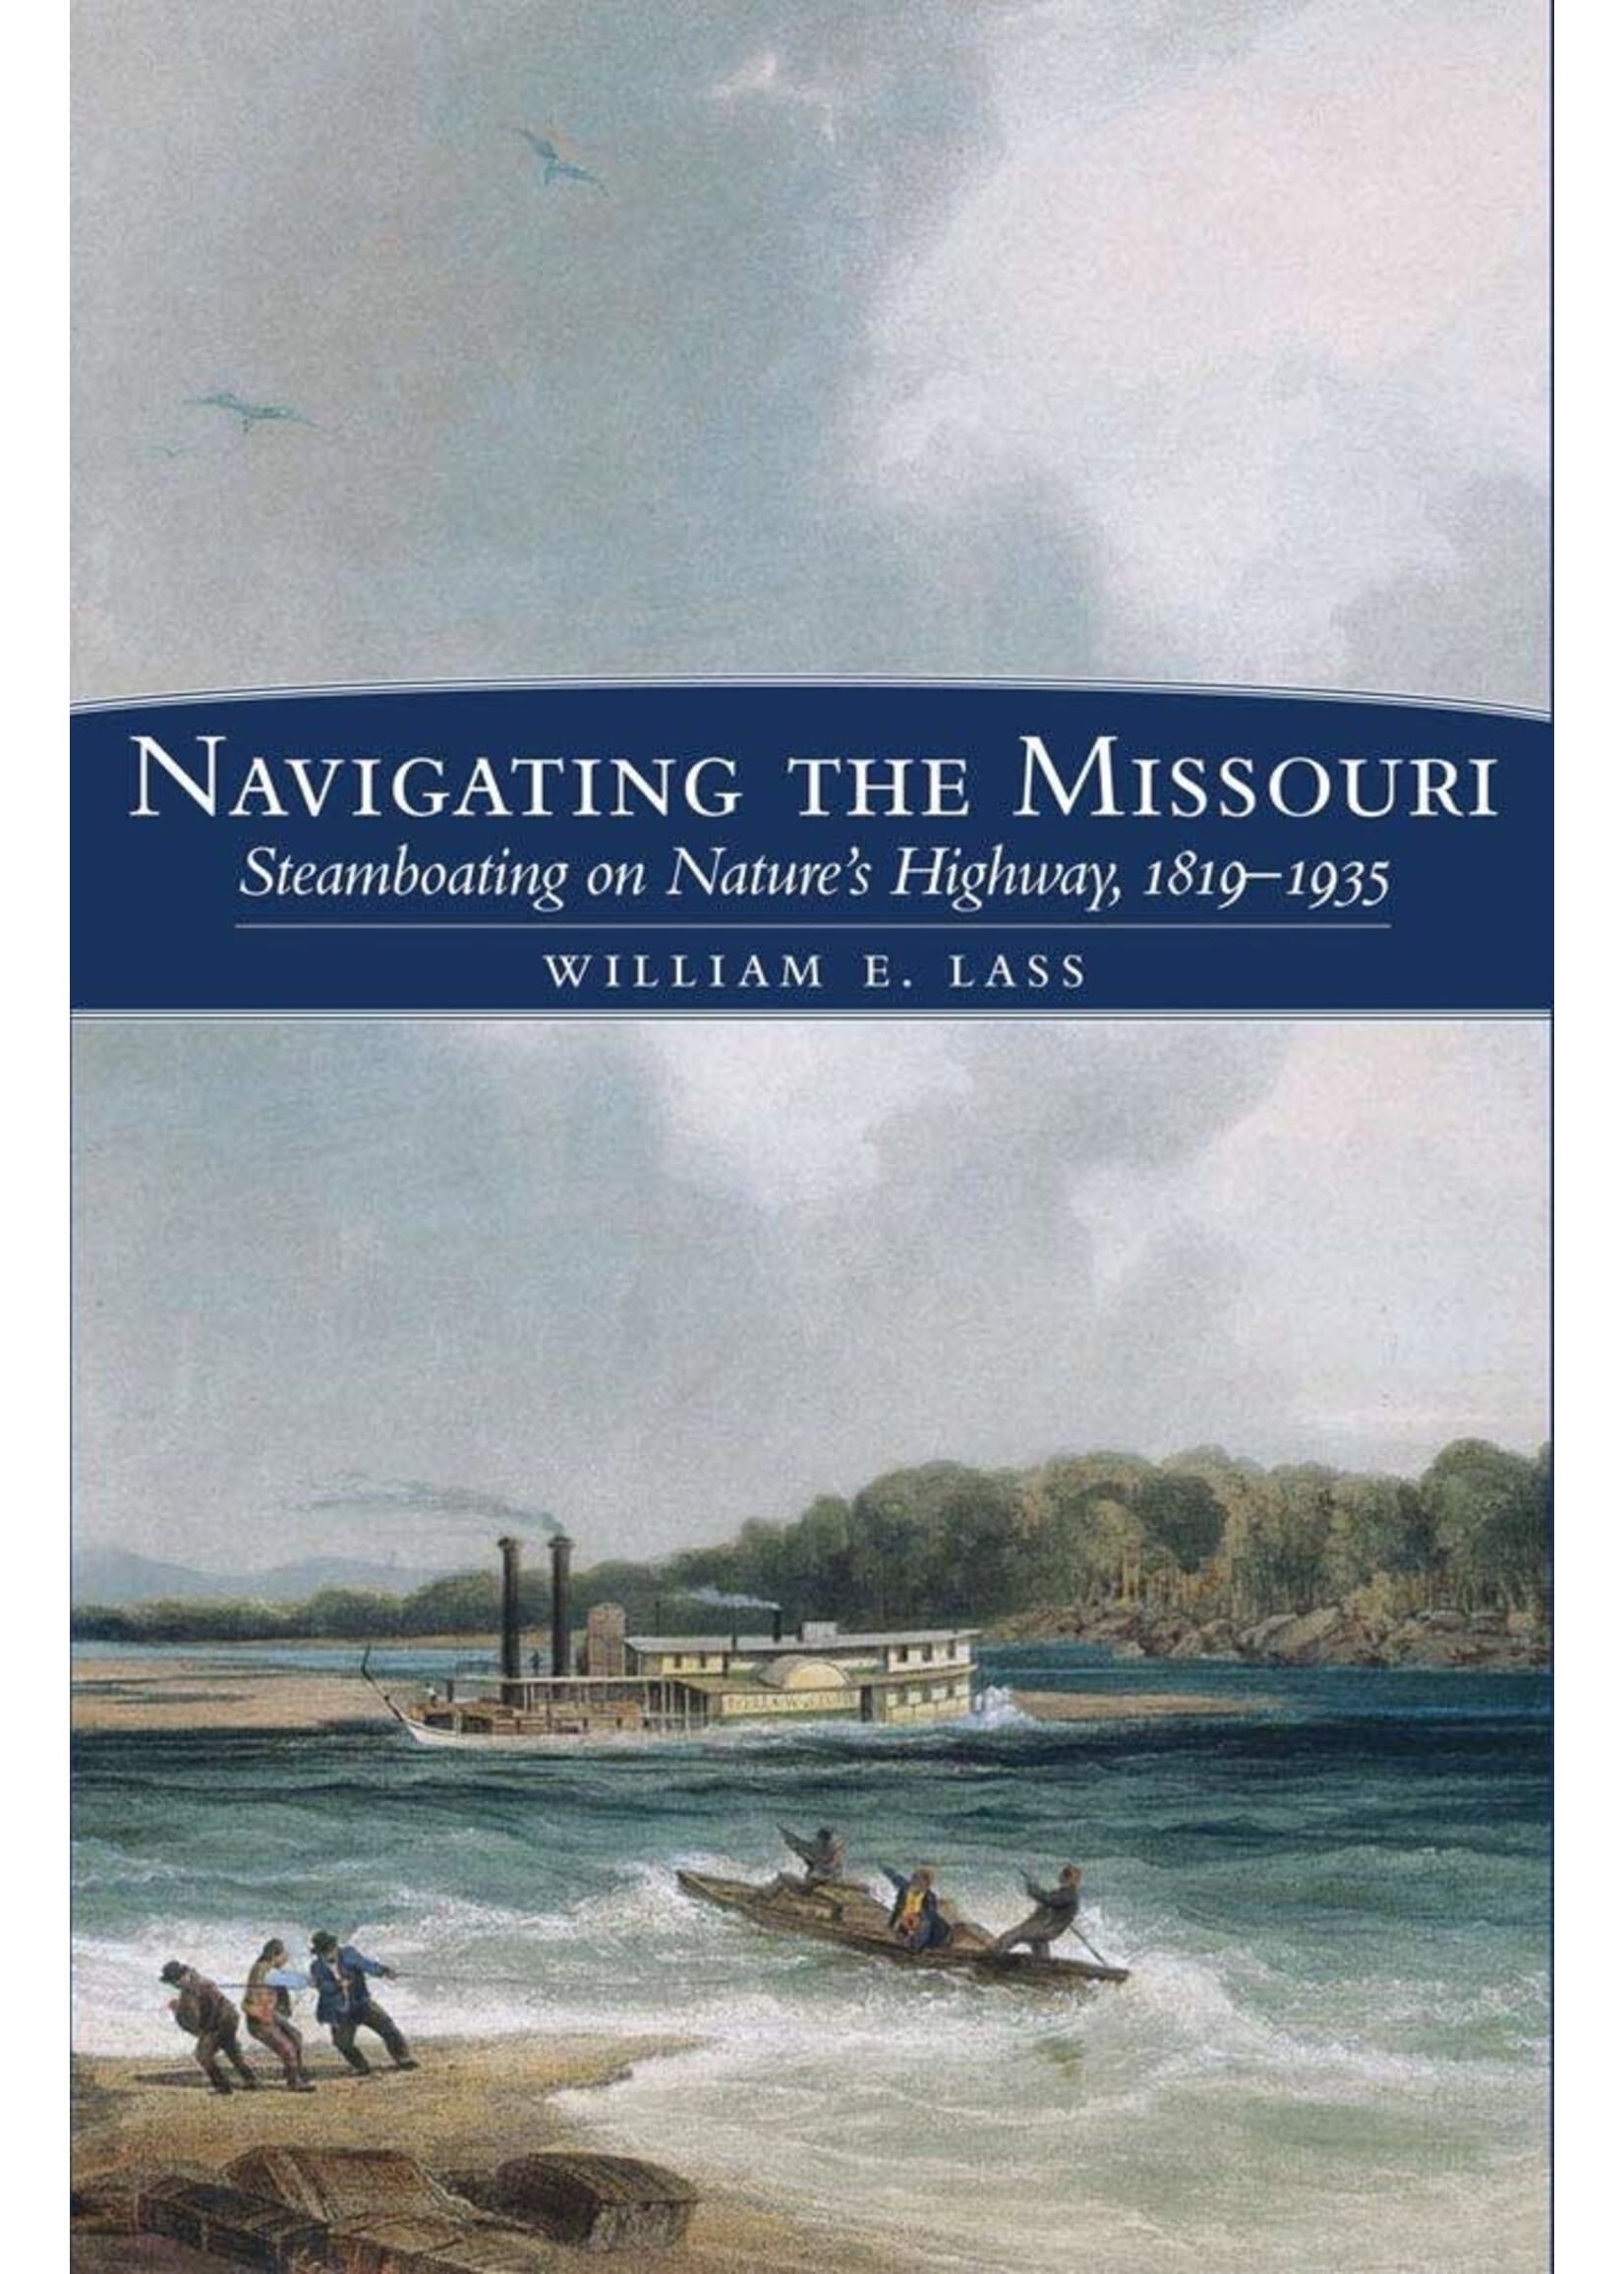 Navigating the Missouri: Steamboating on Nature's Highway, 1819-1935